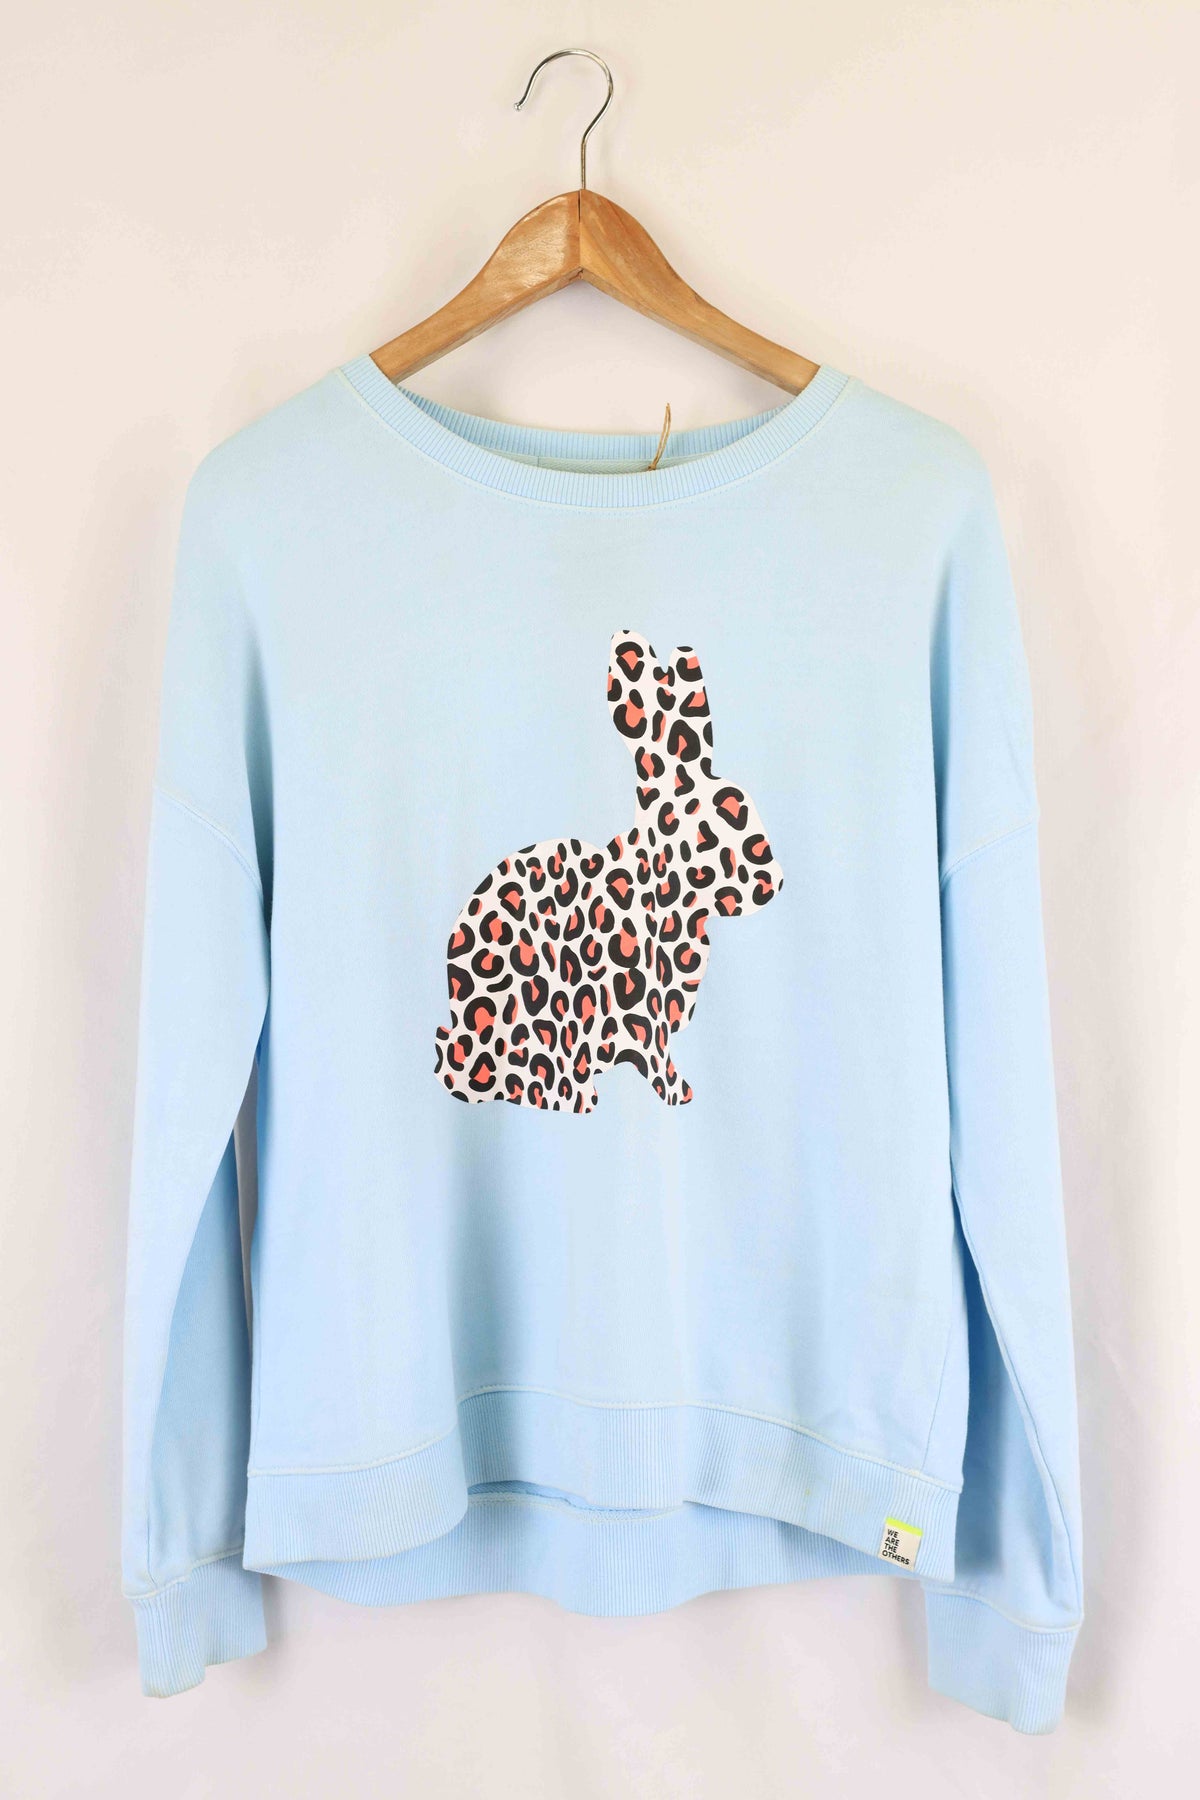 We Are The Others Rabbit Print Blue Jumper 6